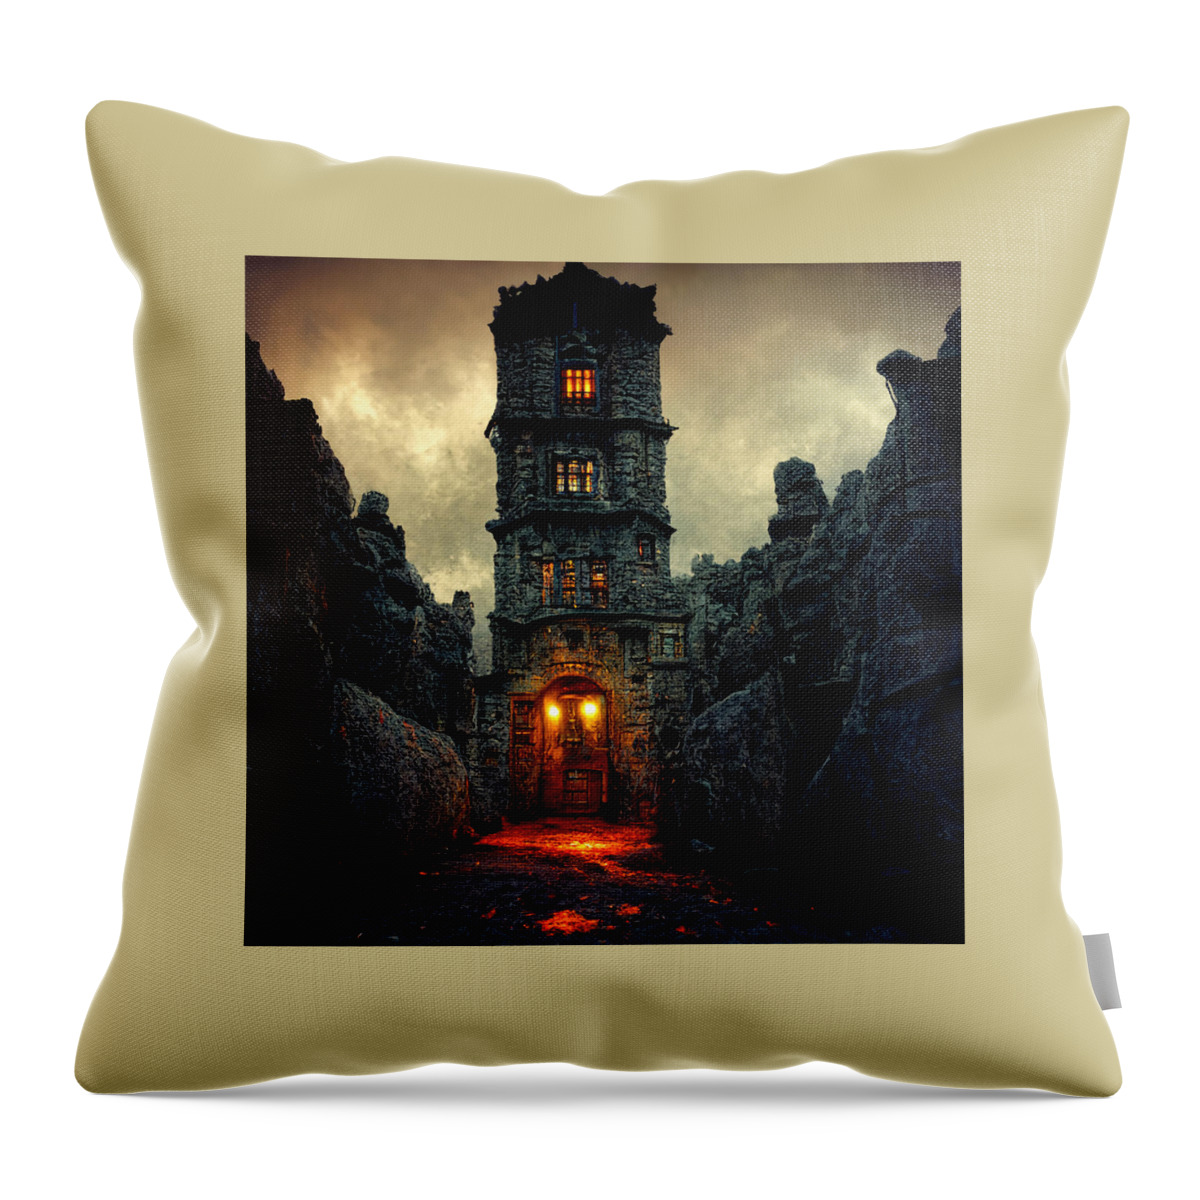 Angry Castle Dungeon School Décor Throw Pillow featuring the painting angry castle dungeon school gritty texture stone. Cinema 7d99673c a6d7 41f5 93ad 3c80399 by Celestial Images